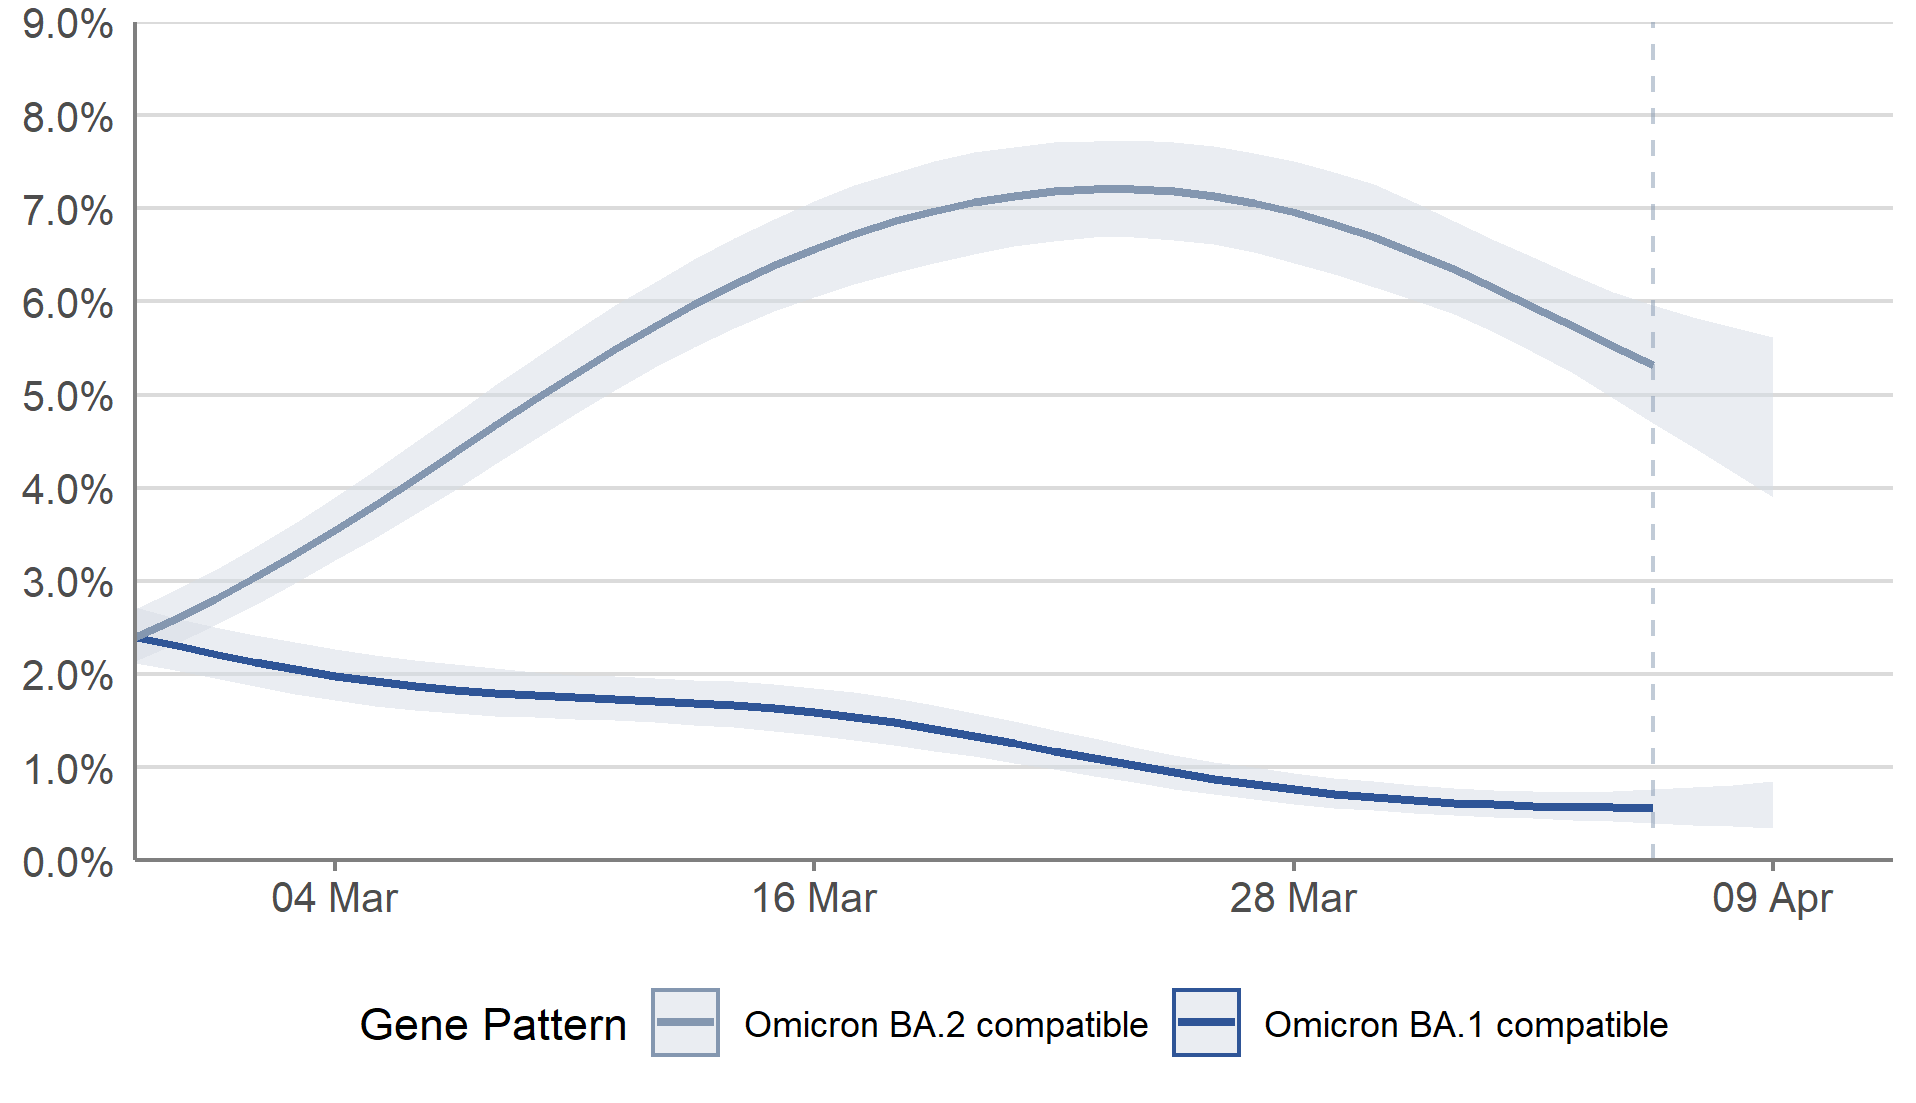 In Scotland, the percentage of people with infections compatible with the Omicron BA.2 variant has decreased in the most recent week. The percentage of people with infections compatible with the Omicron BA.1 continued to decrease in the most recent week.